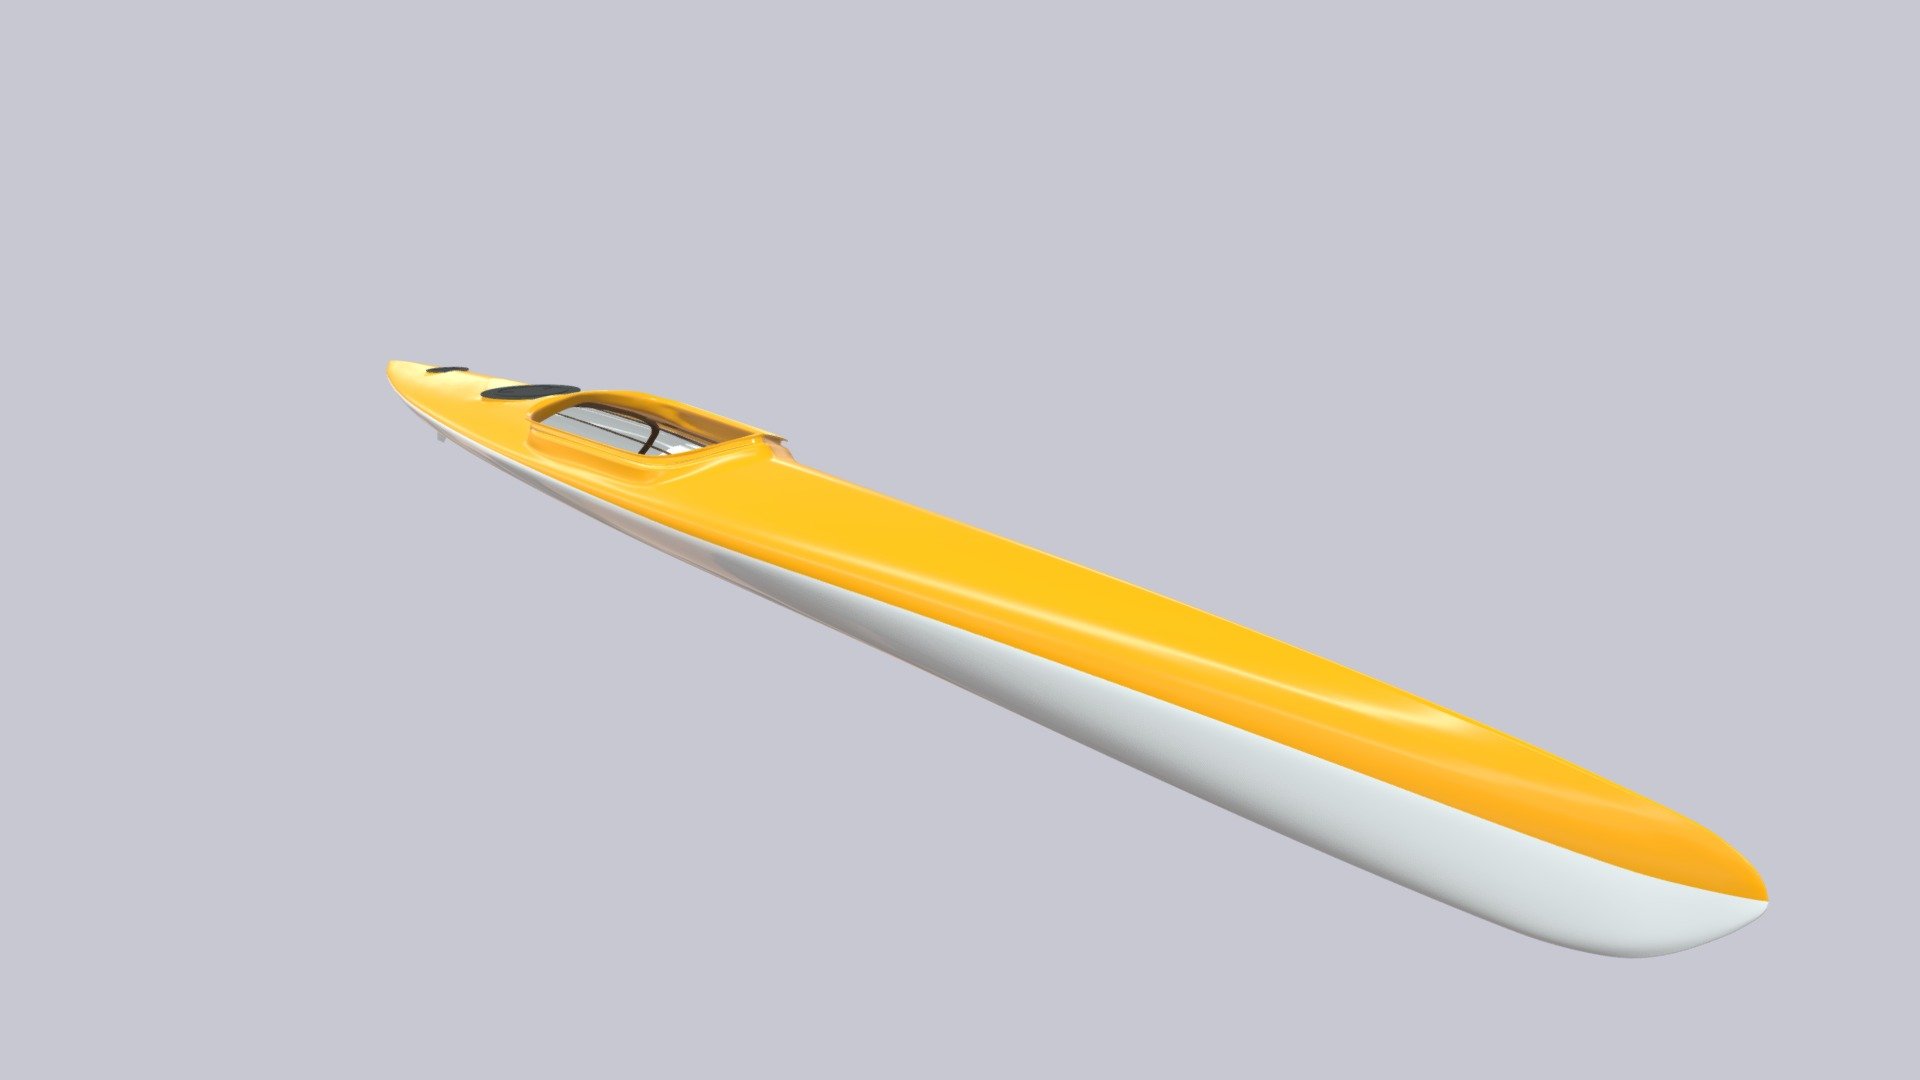 A 3D model based losely on the Escape Kayak. This kayak design by Bjørn Johansen from Denmark is designed for competitions but also good for long distances.
Includes blend file with low poly model and modifiers.
This kayak can be used for many kinds of maritime and outdoor scenes.

This 3D model comes in seven color combinations: 
1. Yellow and white
2. Yellow with glass fiber pattern
3. Red and white
4. Red and white with glass fiber pattern
5. Red
6. White
7. White with glass fiber pattern

The colors can easily be modified. There are two levels of detail. The lowpoly can be used for far off shots or modified further.
Highpoly. Triangles with subsurf modifier: 52.377       Lowpoly, triangles: 4.824
The kayak collections are ready to be linked into other blend files.
A small sunny sky HDR enviroment is included.




 - Kayak - Buy Royalty Free 3D model by ruar 3d model